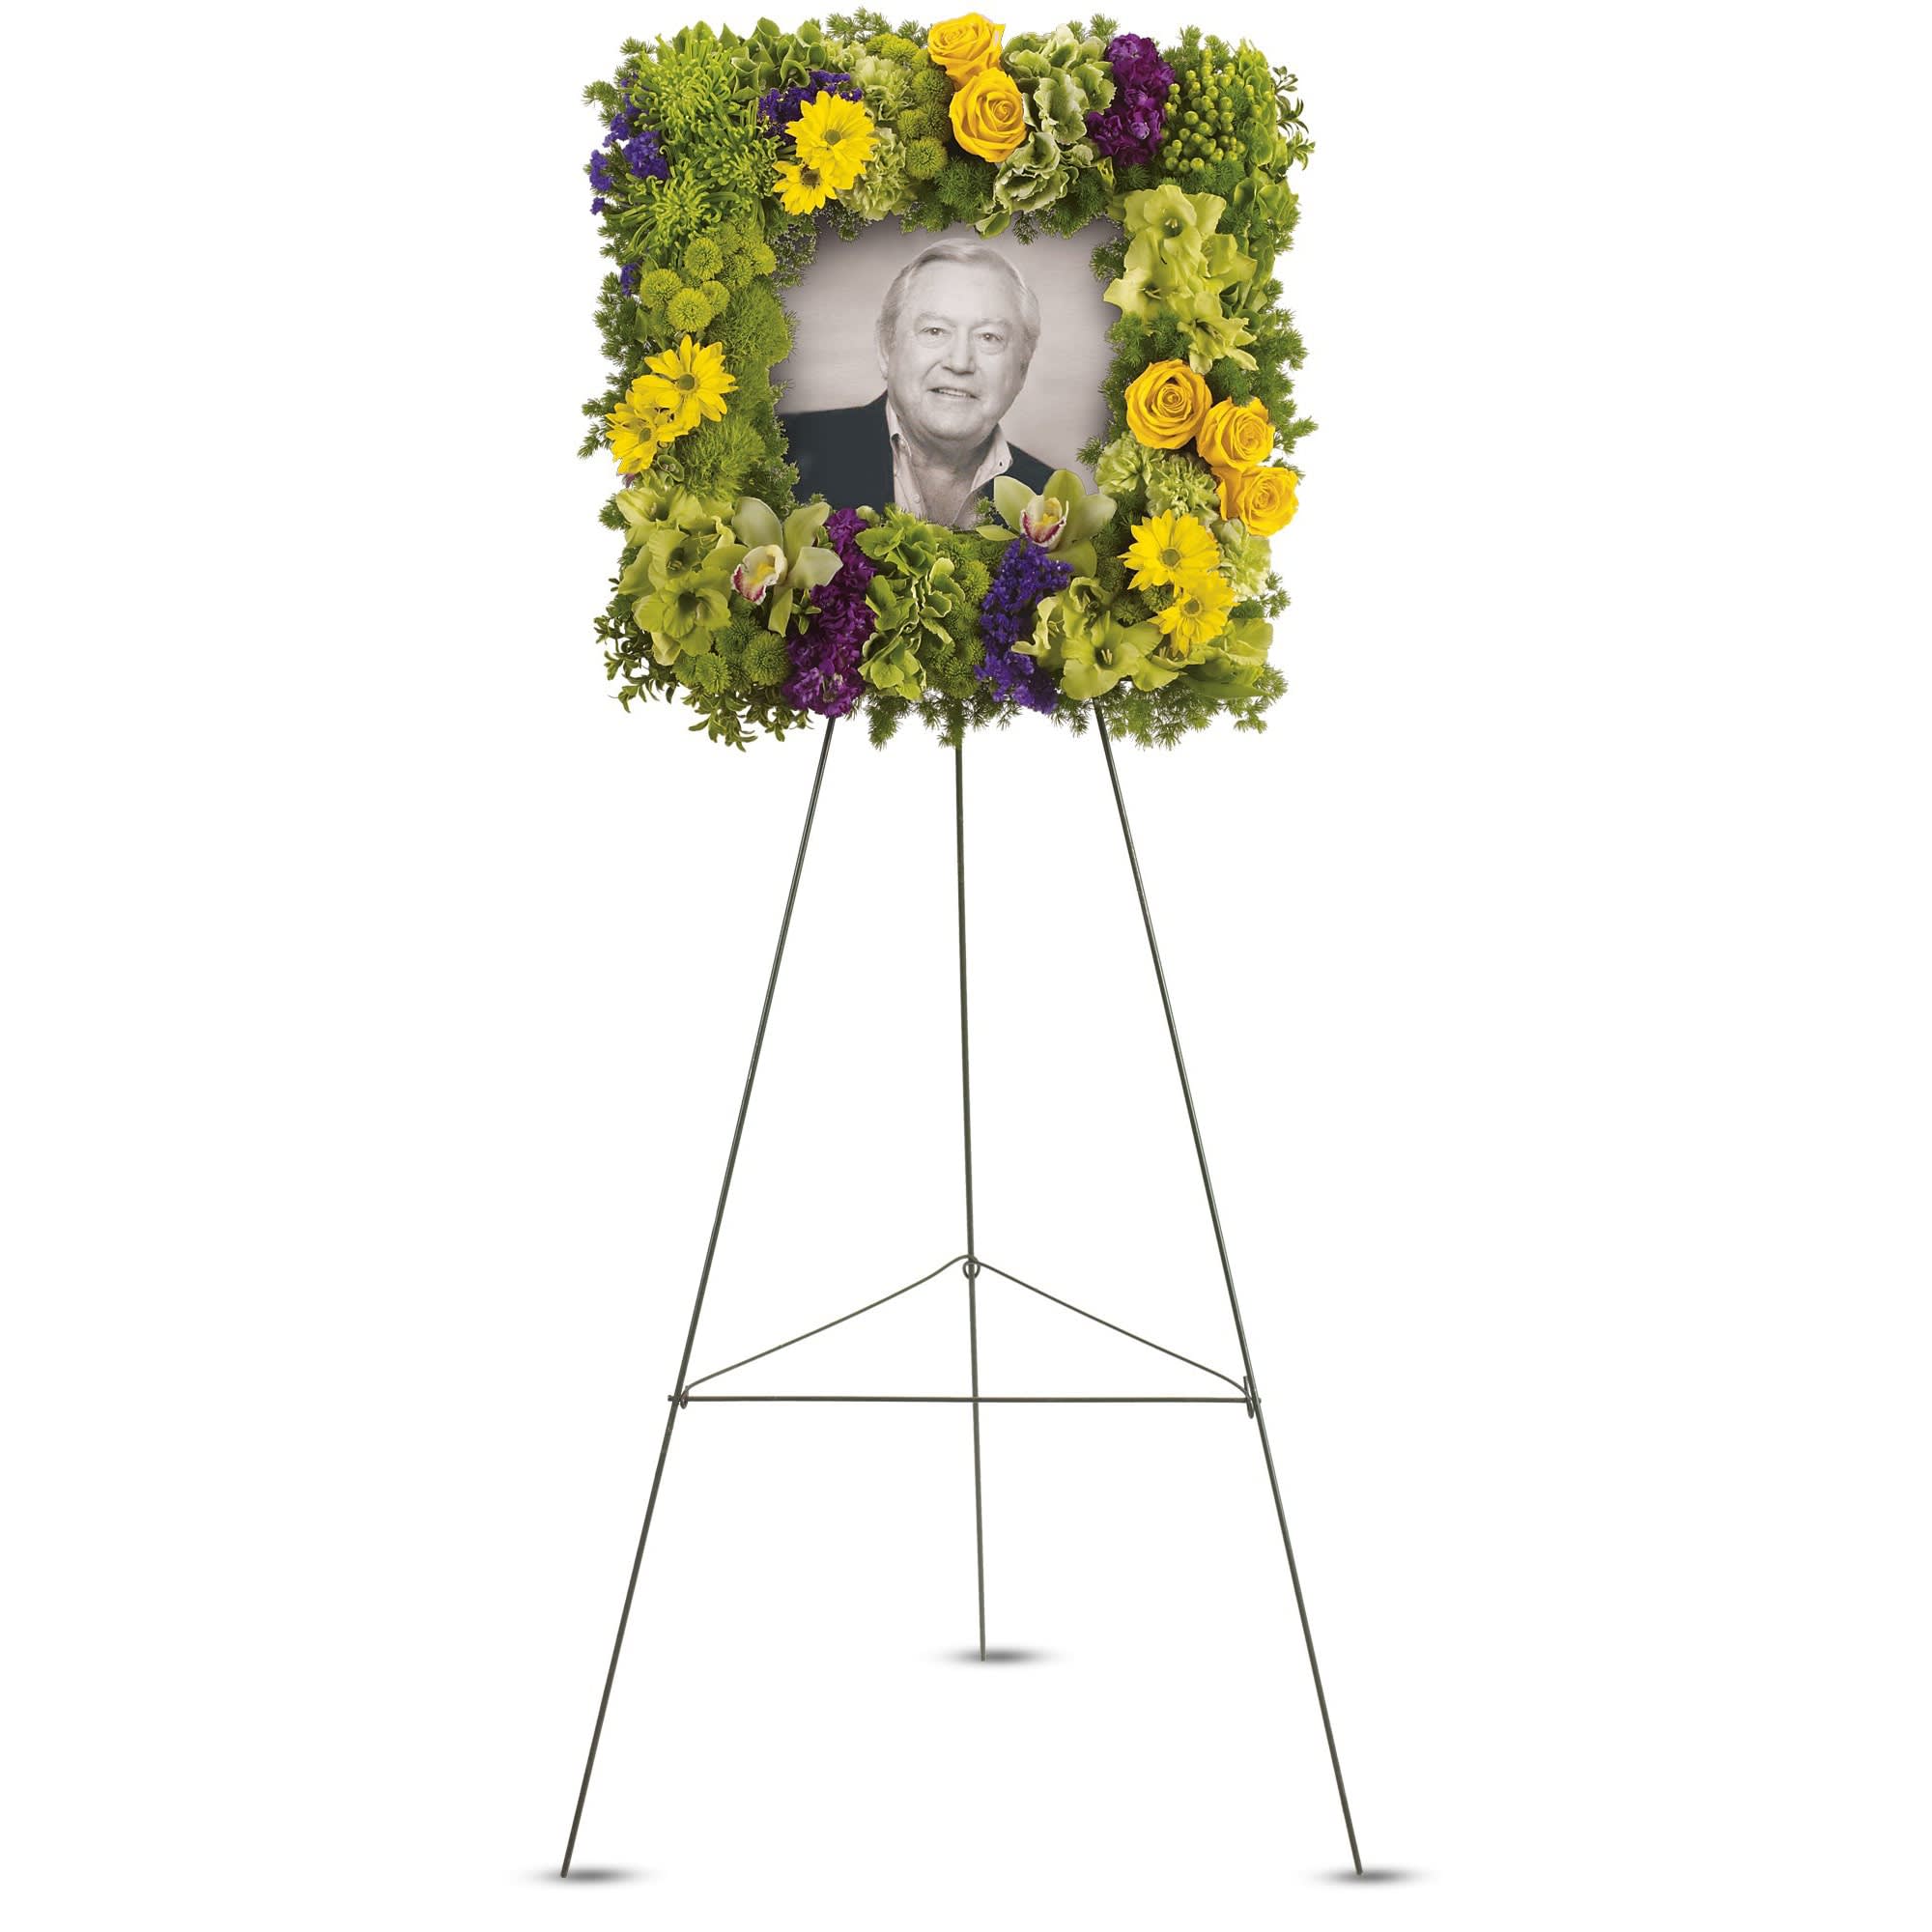 Richly Remembered by Teleflora - If you are lucky enough to have a treasured photograph, or other memento of someone dear, this is such a lovely way of sharing your memories with others. Pretty blossoms and greenery create a beautiful framework for your tribute.  